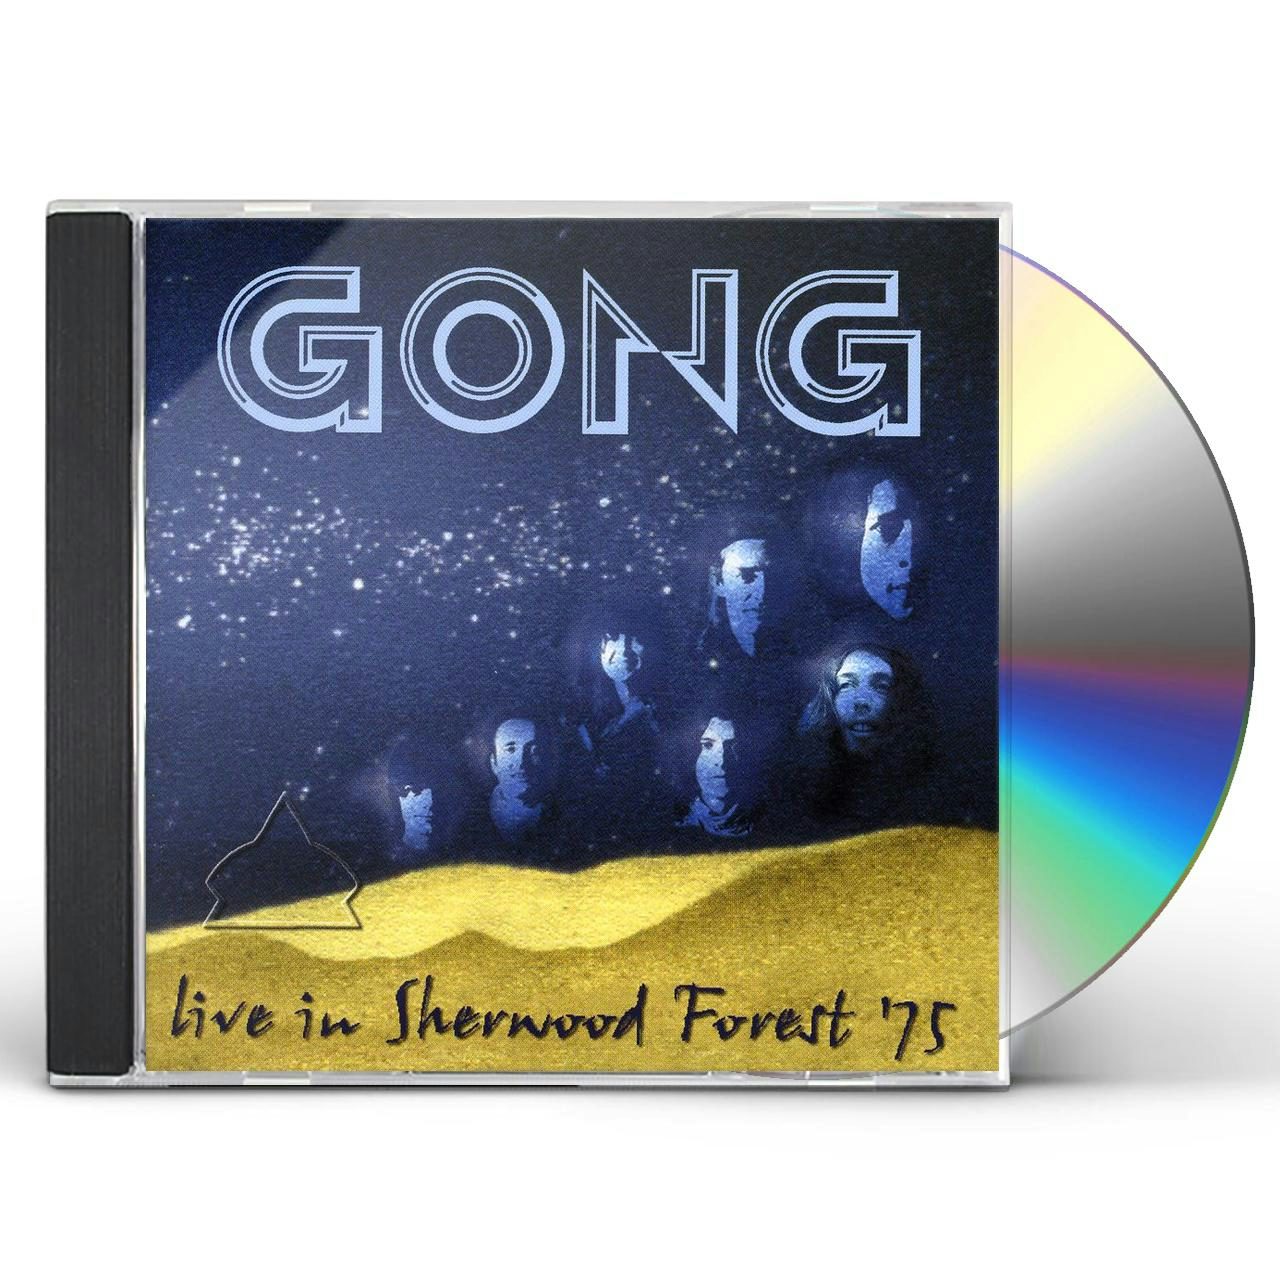 Gong LIVE IN SHERWOOD FOREST 75 CD $17.99$15.99